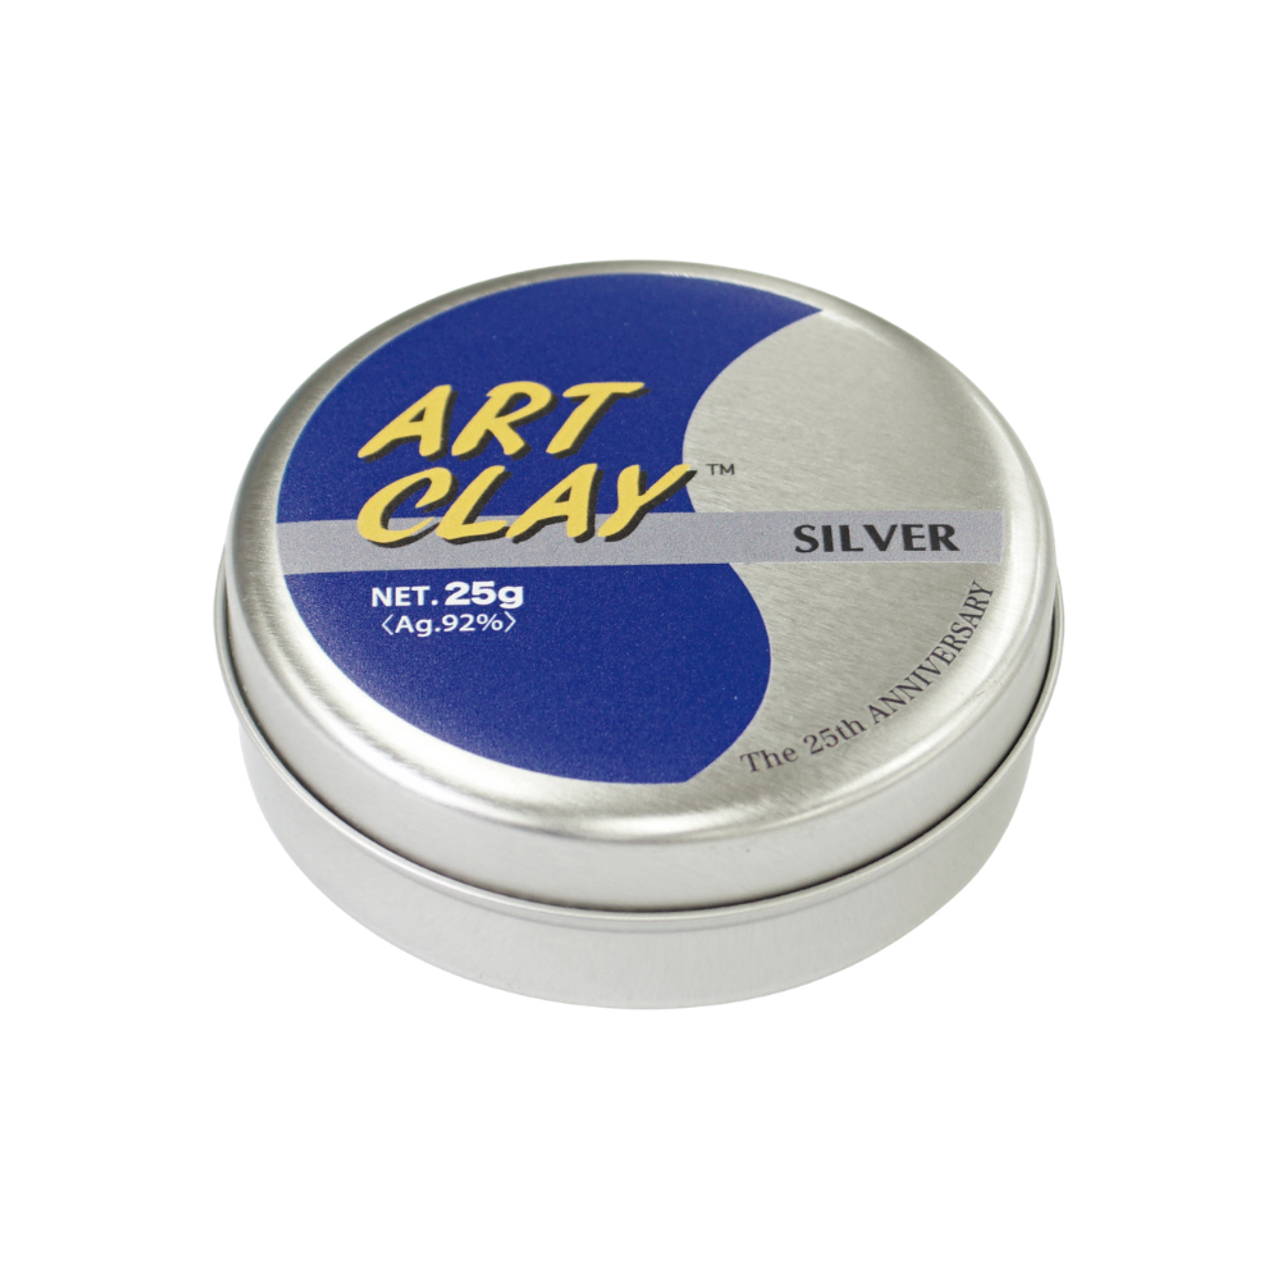 Blue tin. Happy 25th Anniversary Art Clay! Get your collectible limited edition tins with 25gm Art Clay Silver.